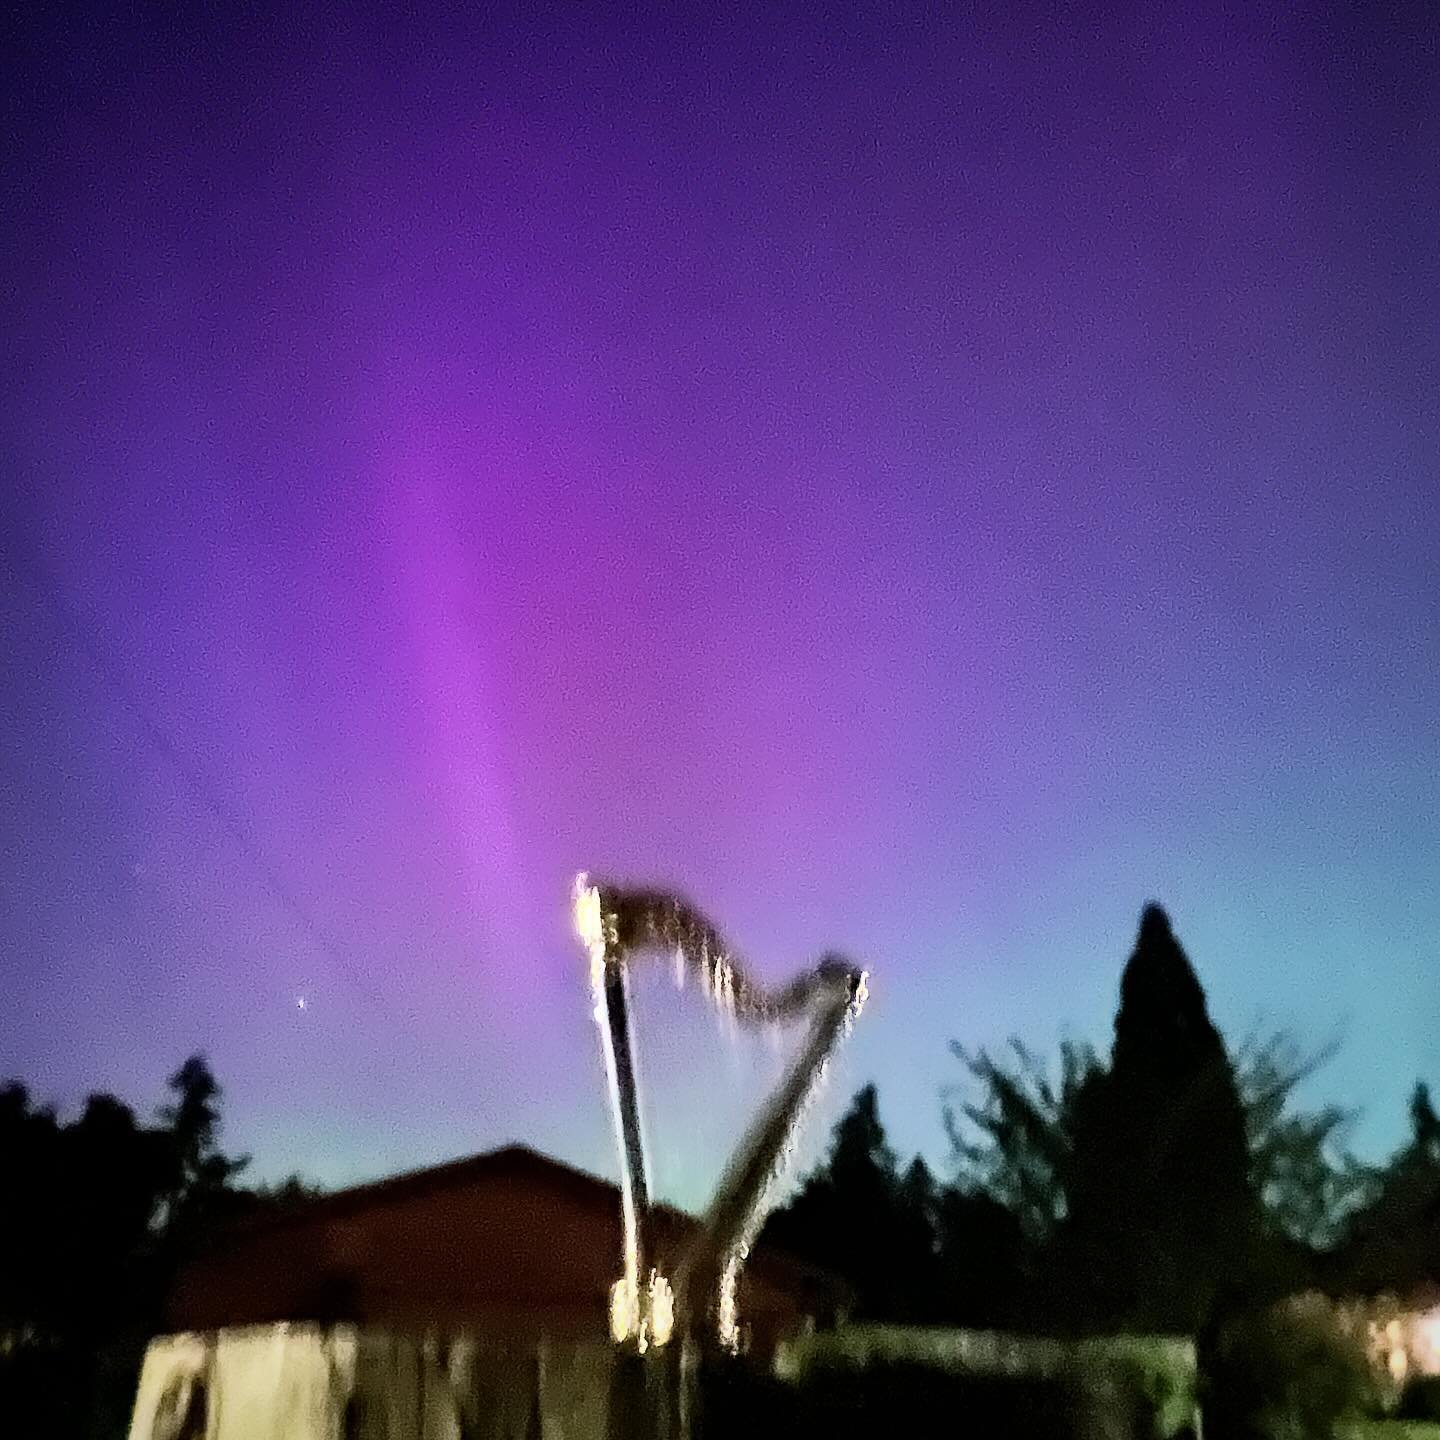 Wow, those Northern Lights sure were amazing tonight! That was stunning! 💜💖💚💙✨